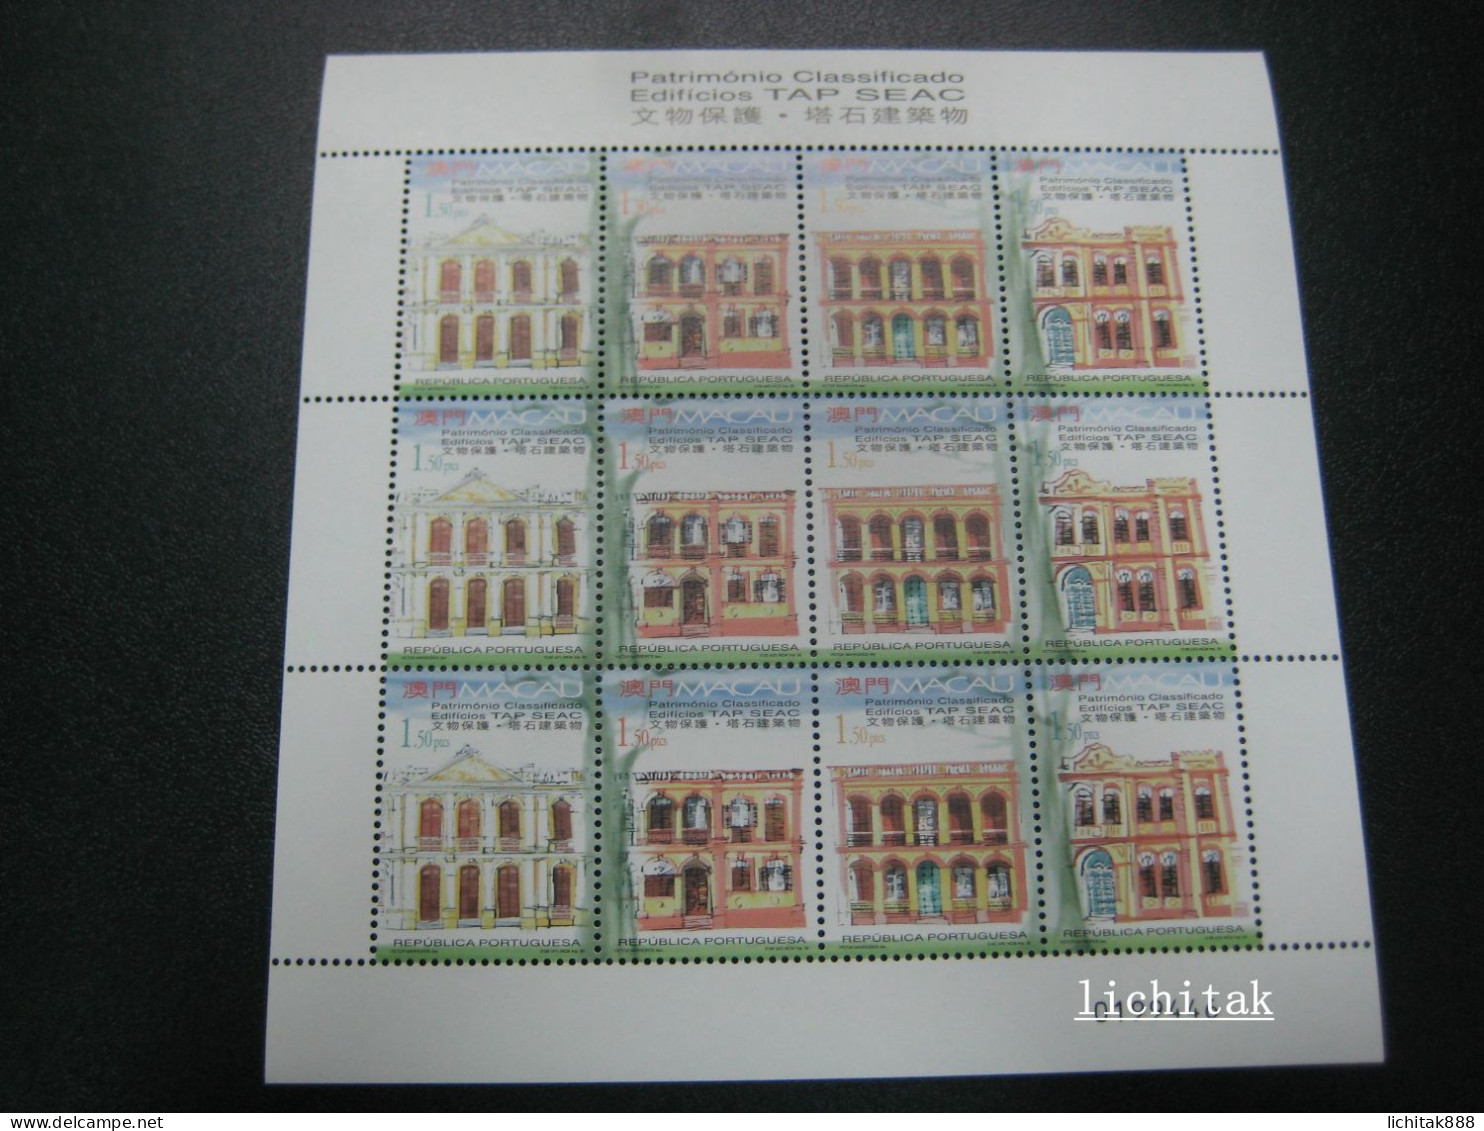 Macau Macao 1999 CLASSIFIED CULTURAL - TAP SEAC BUILDING Stamps MINI PANE  MNH - Unused Stamps